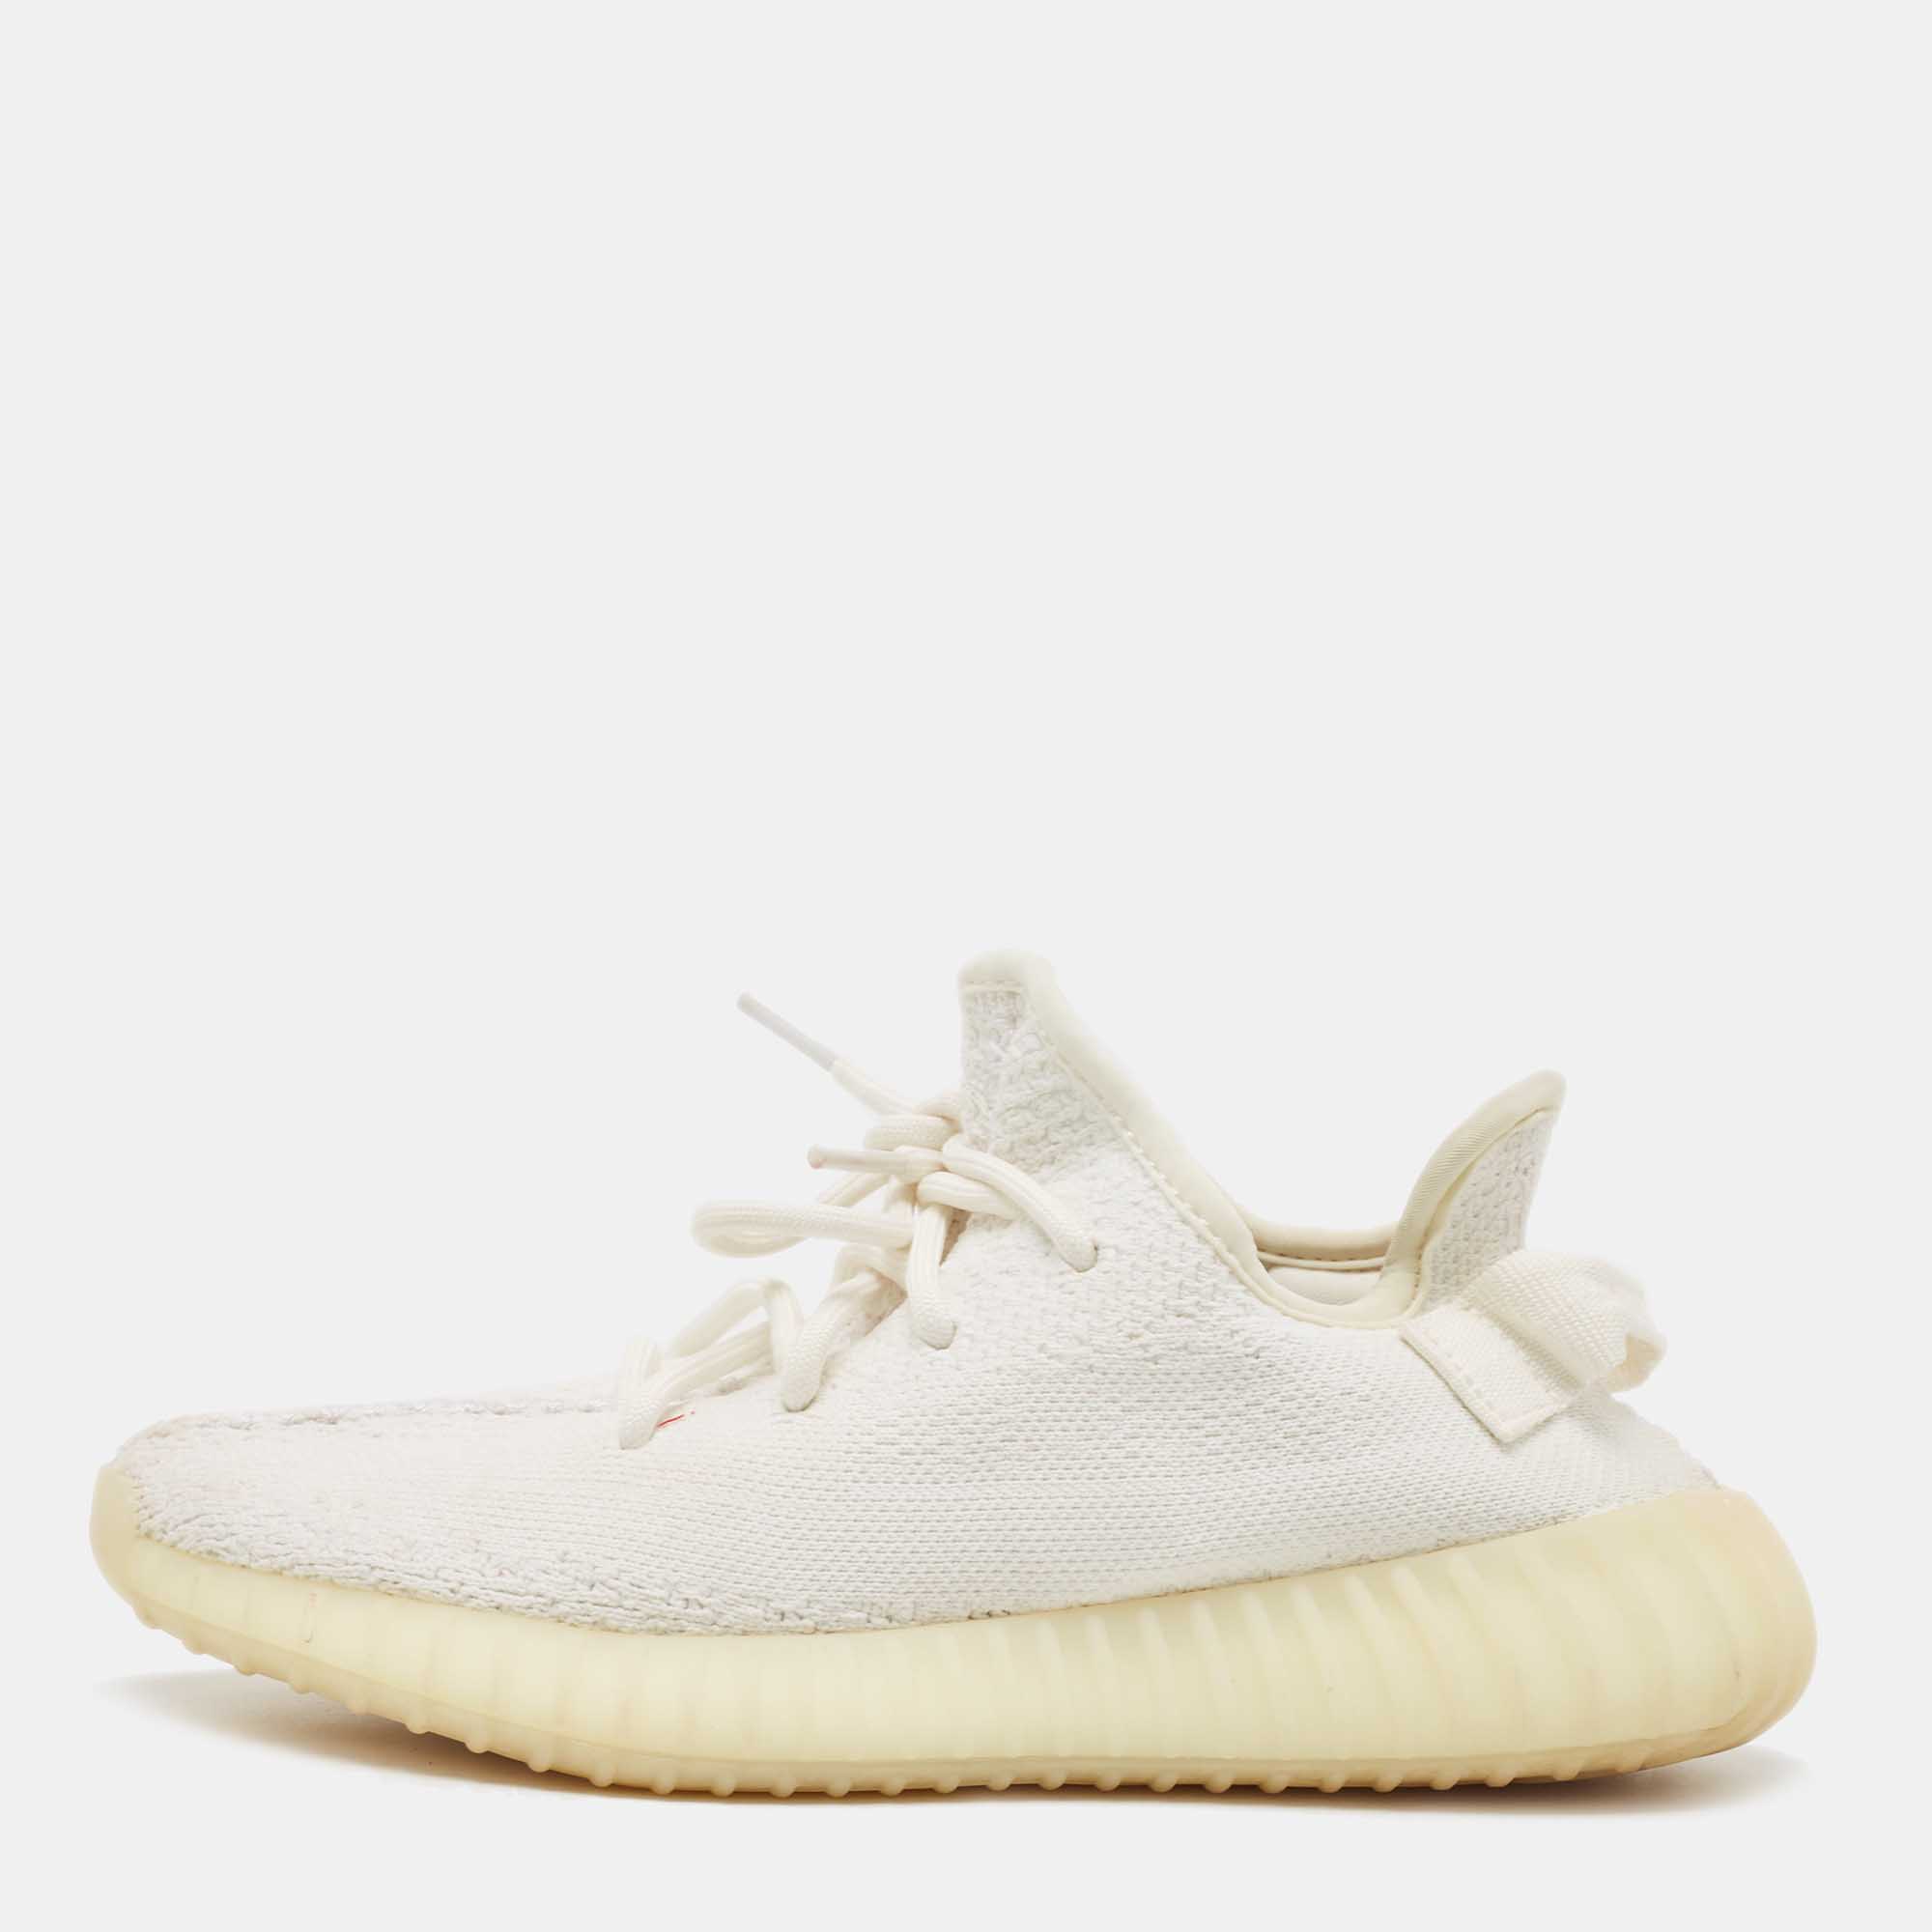 Pre-owned Yeezy X Adidas Cotton Knit Boost 350 V2 Triple White Trainers Size Fr 37 1/3